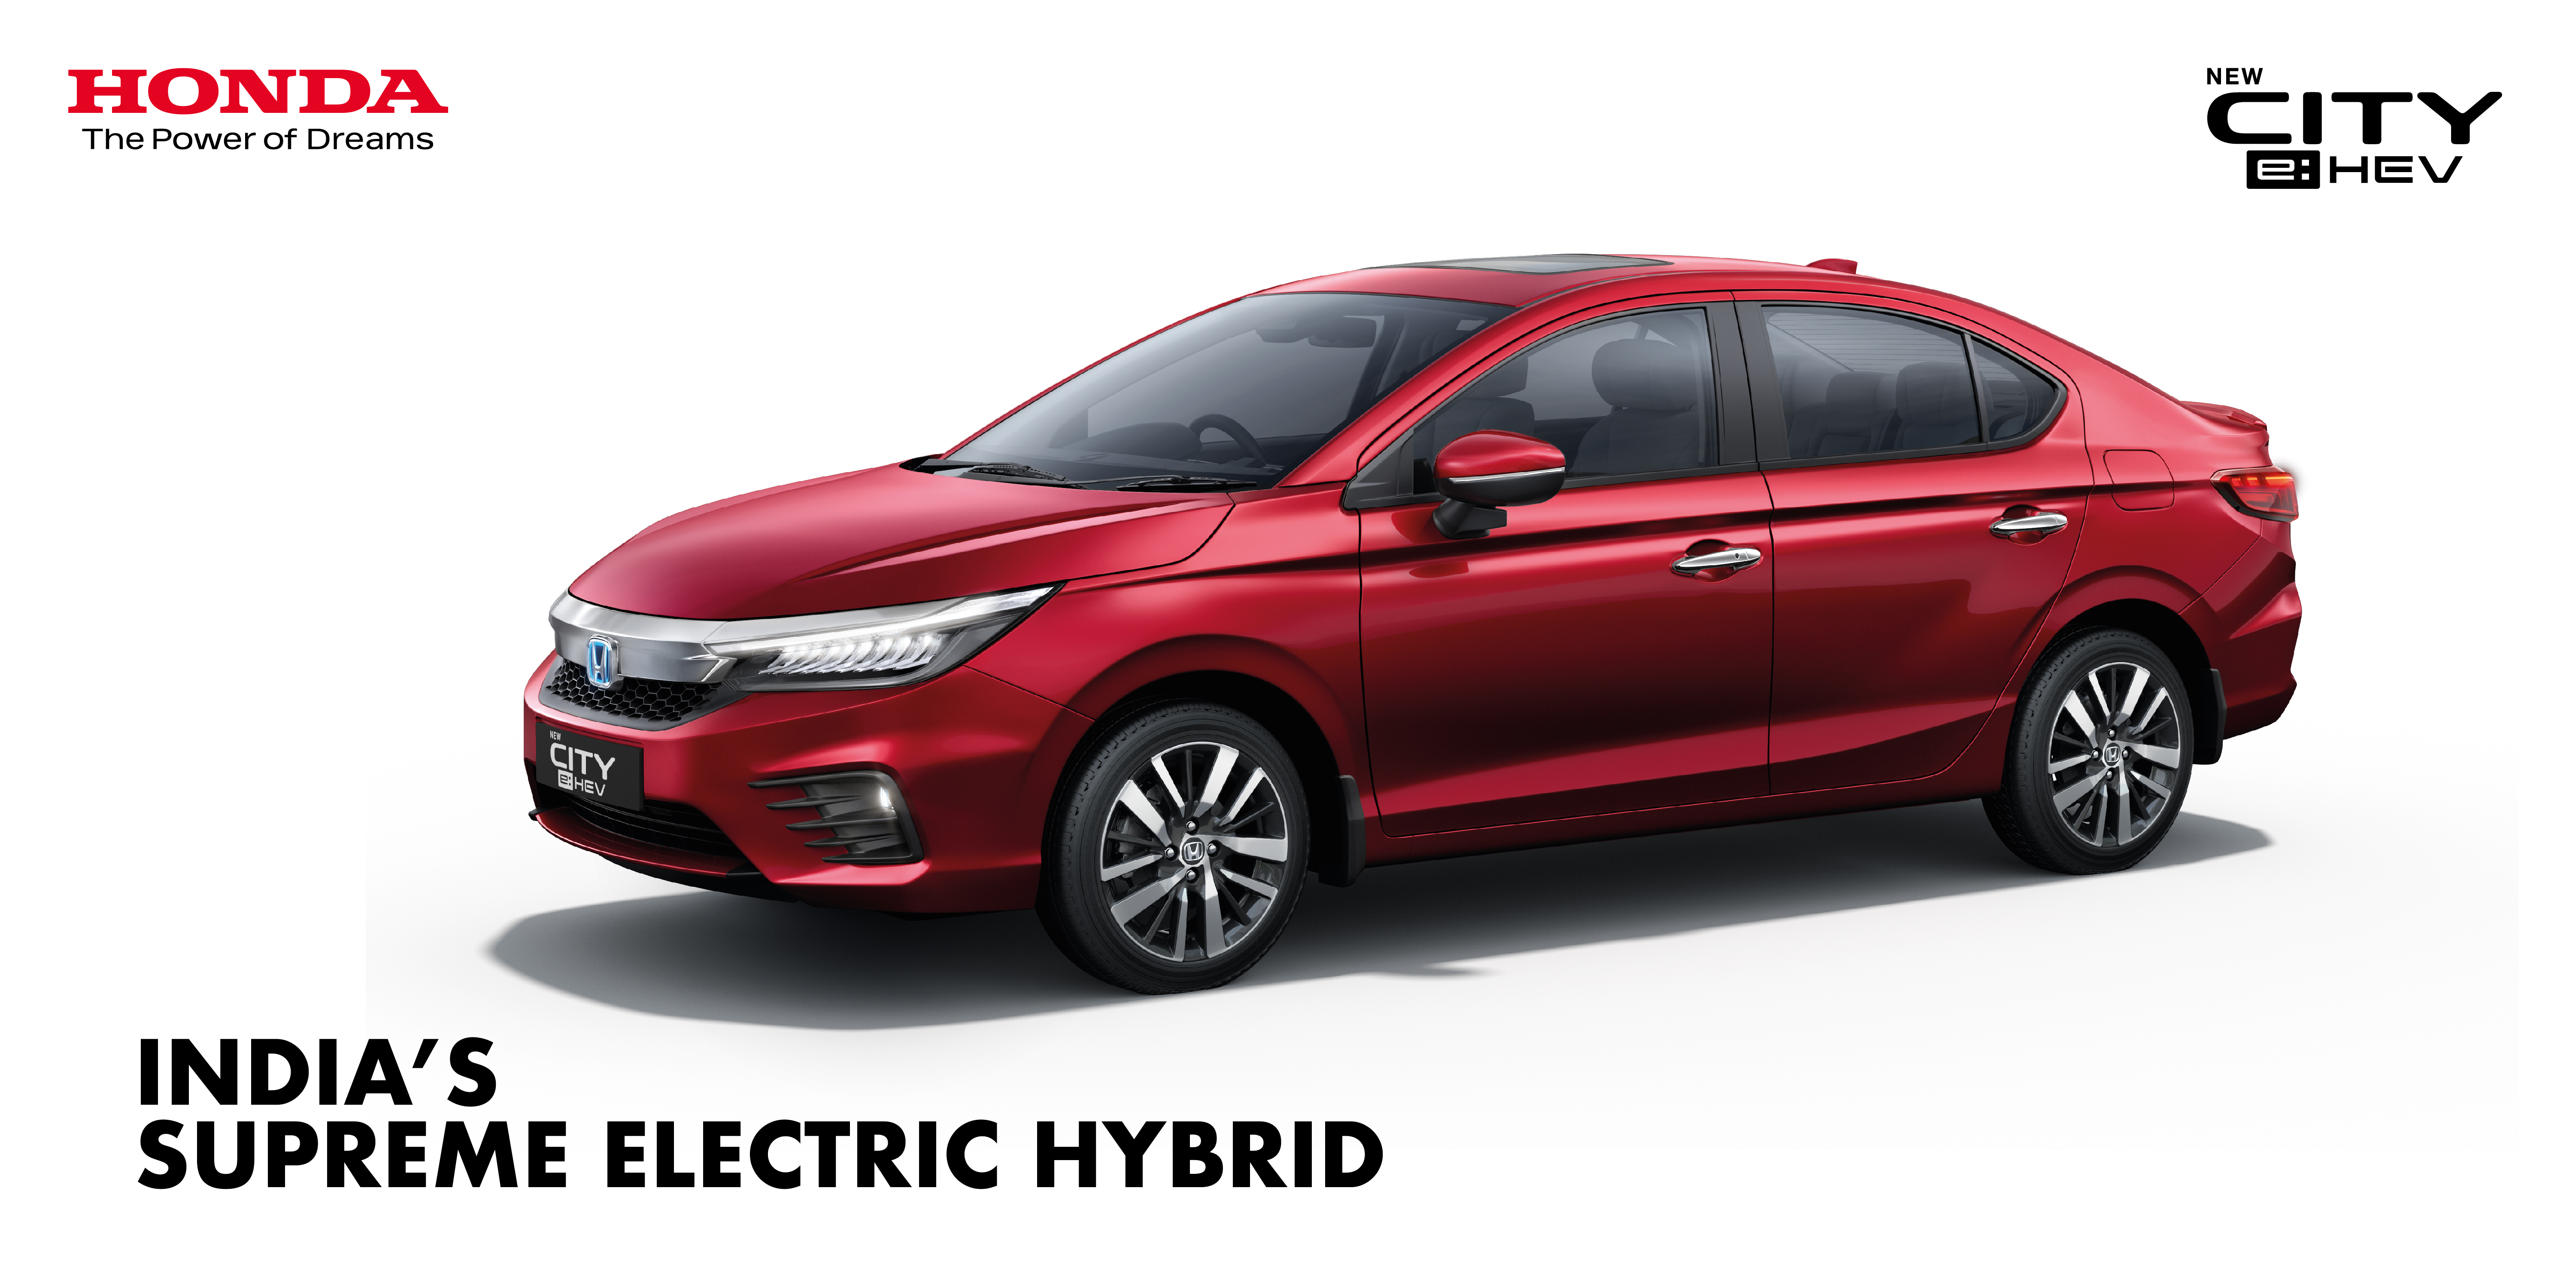 Honda launches India’s First Mainstream  Strong Hybrid Electric Vehicle - New City e:HEV